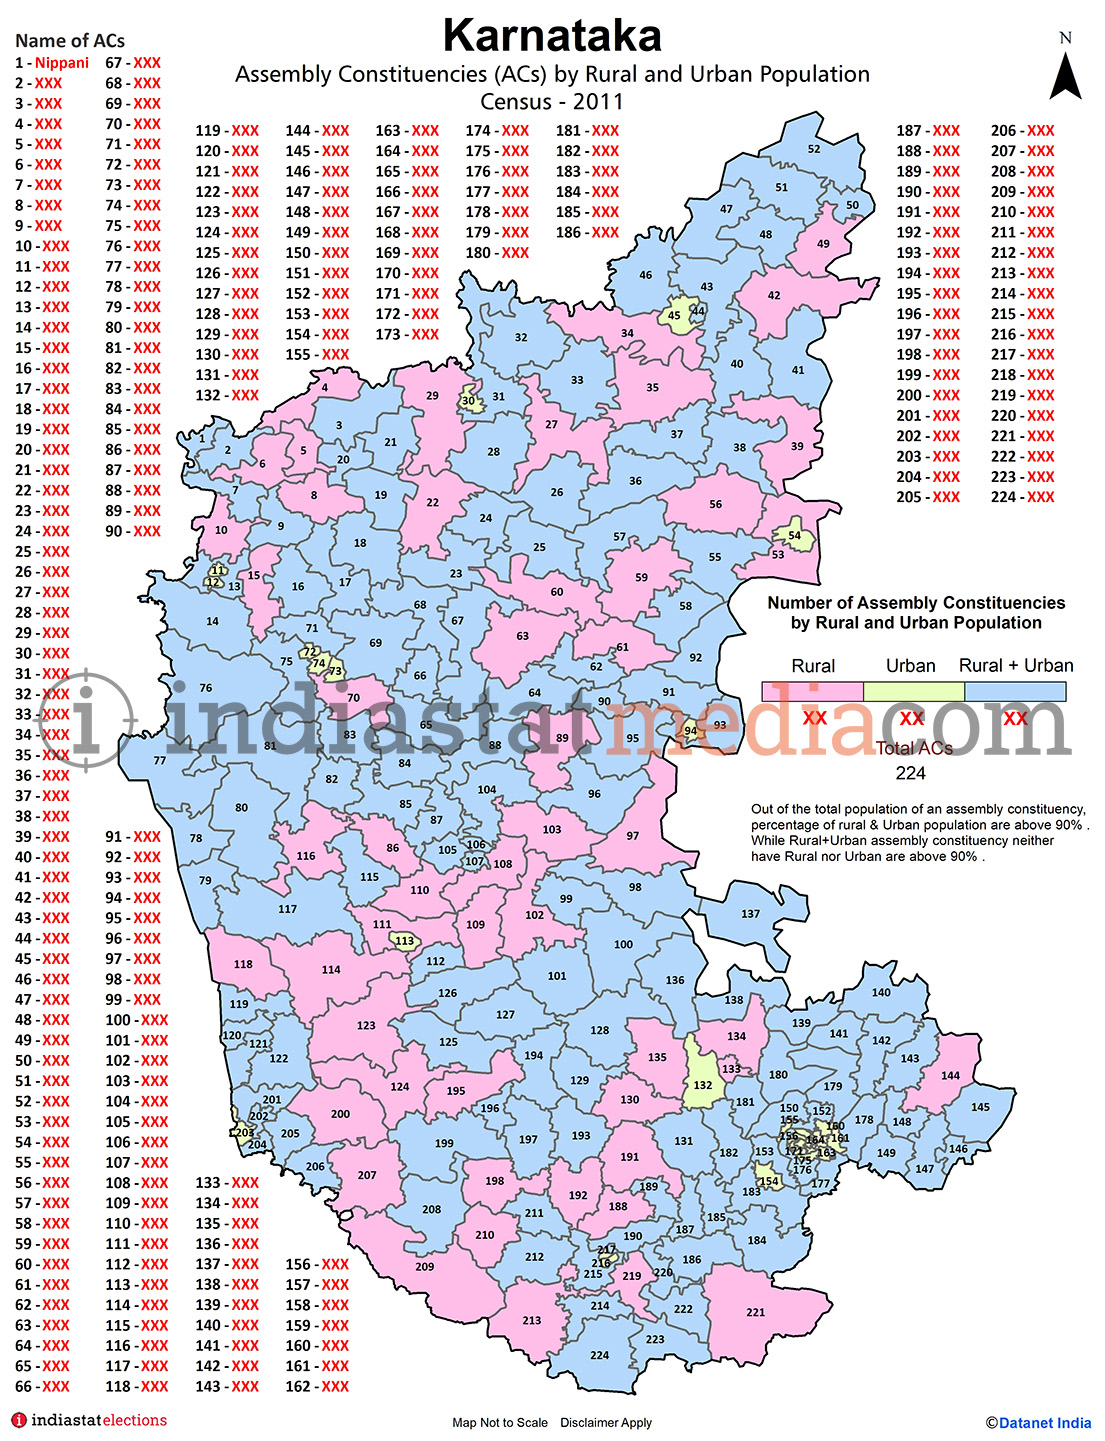 Assembly Constituencies (ACs) by Rural and Urban Population in Karnataka - Census 2011